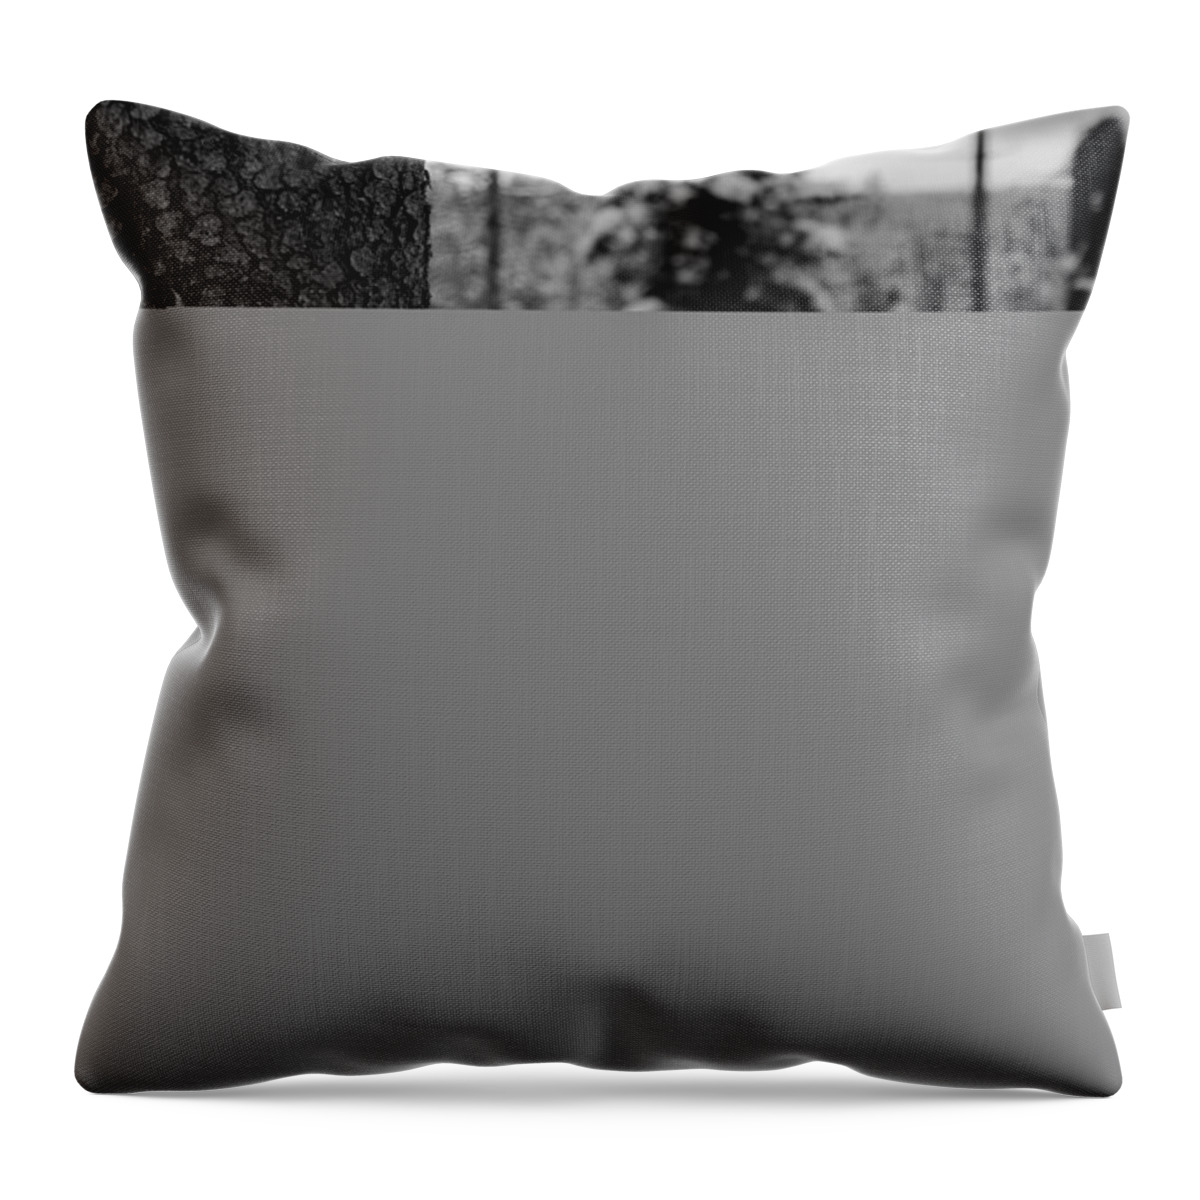 Abenteuer Throw Pillow featuring the photograph On The Tree by Andreas Levi